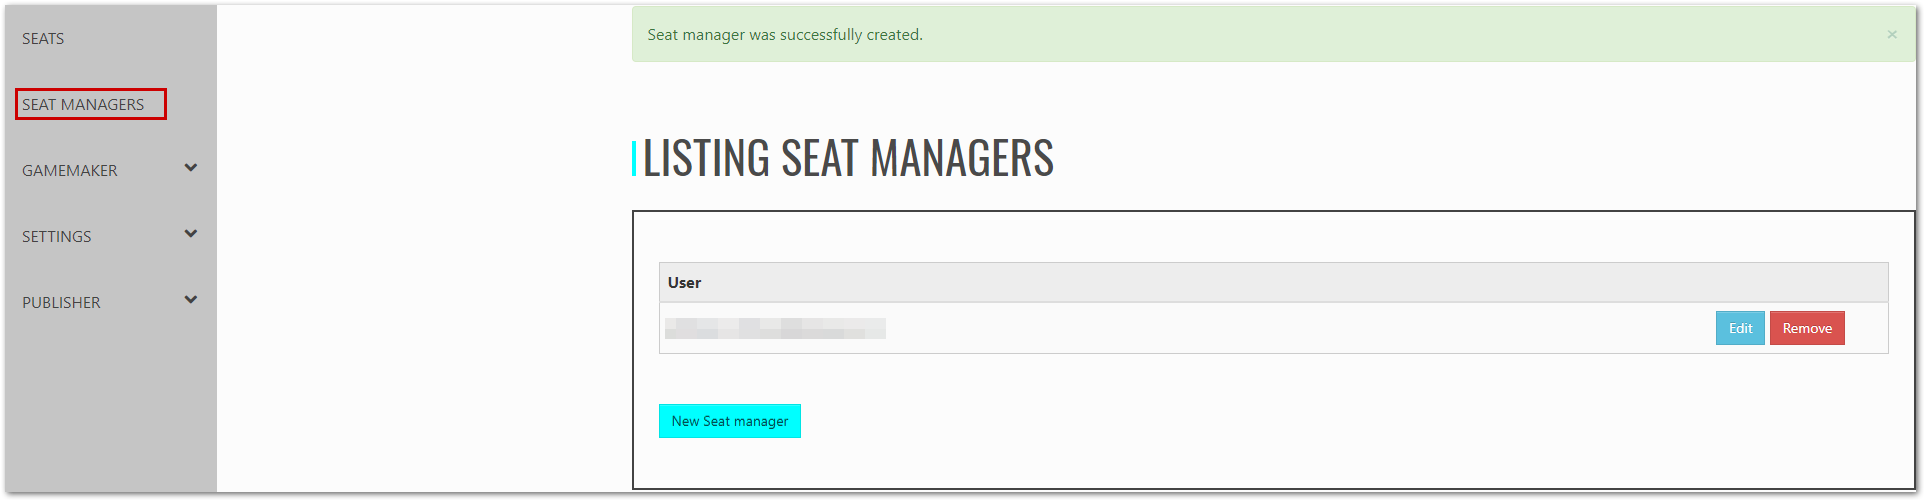 seatmanagers.png